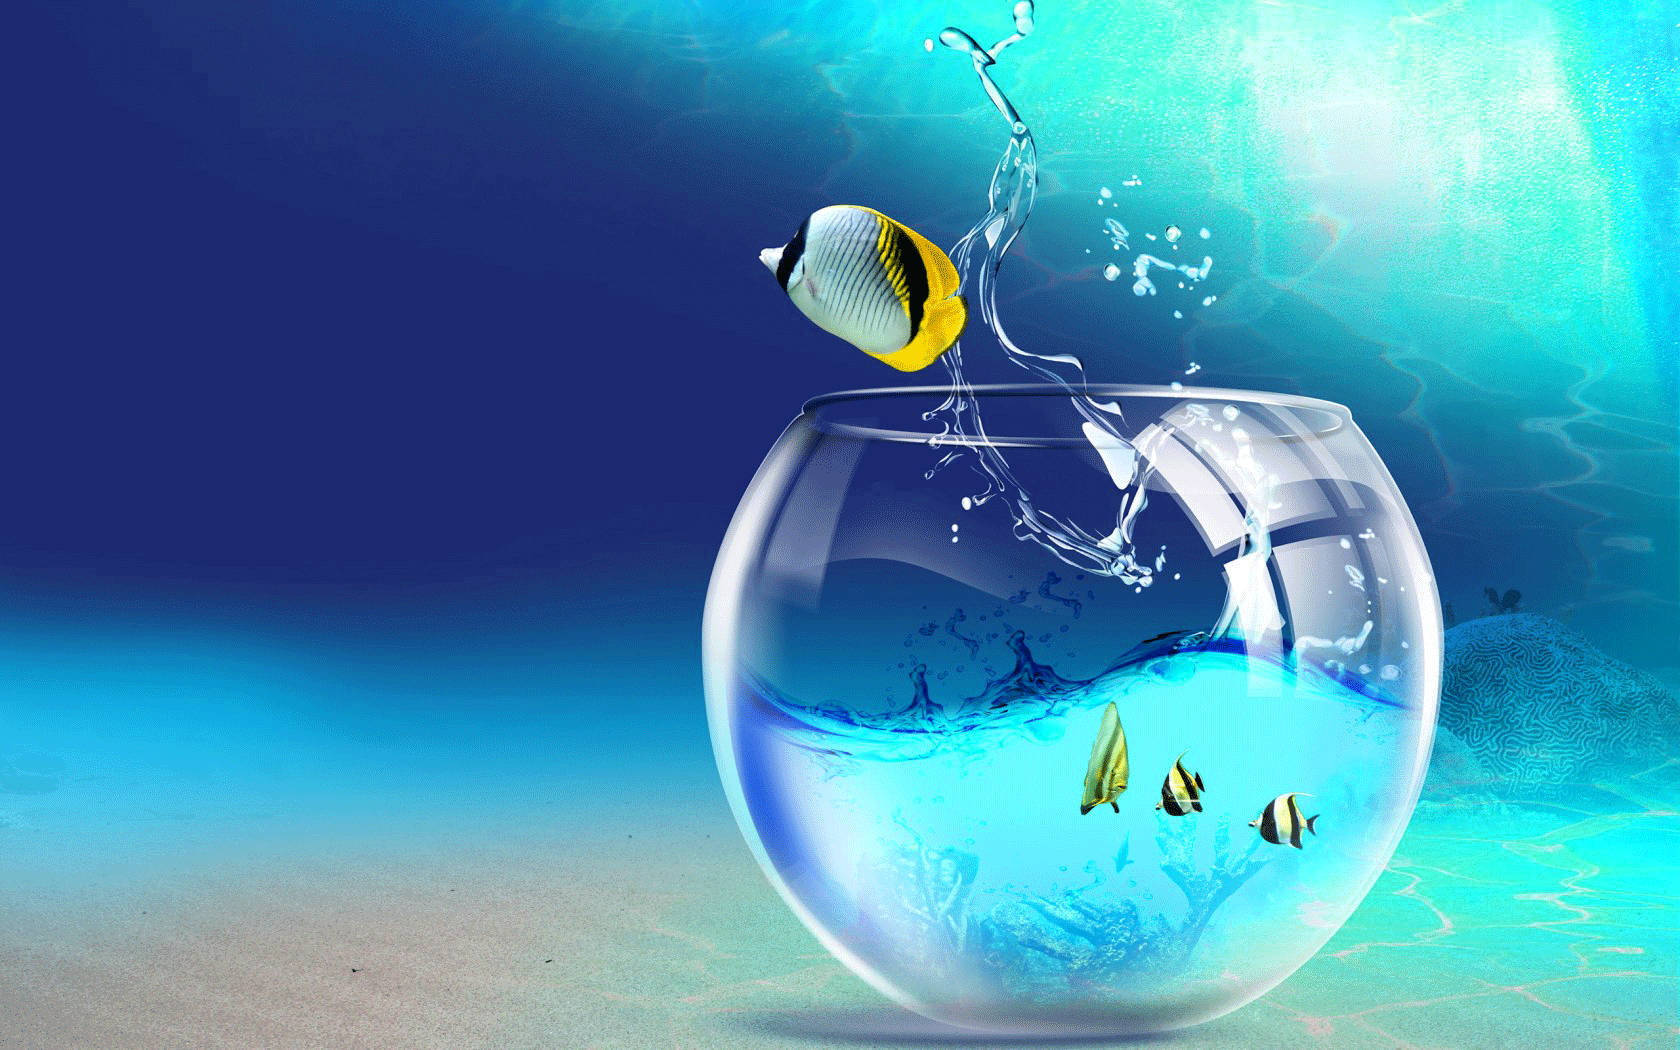 Fishbowl In The Sea For Pc Wallpaper